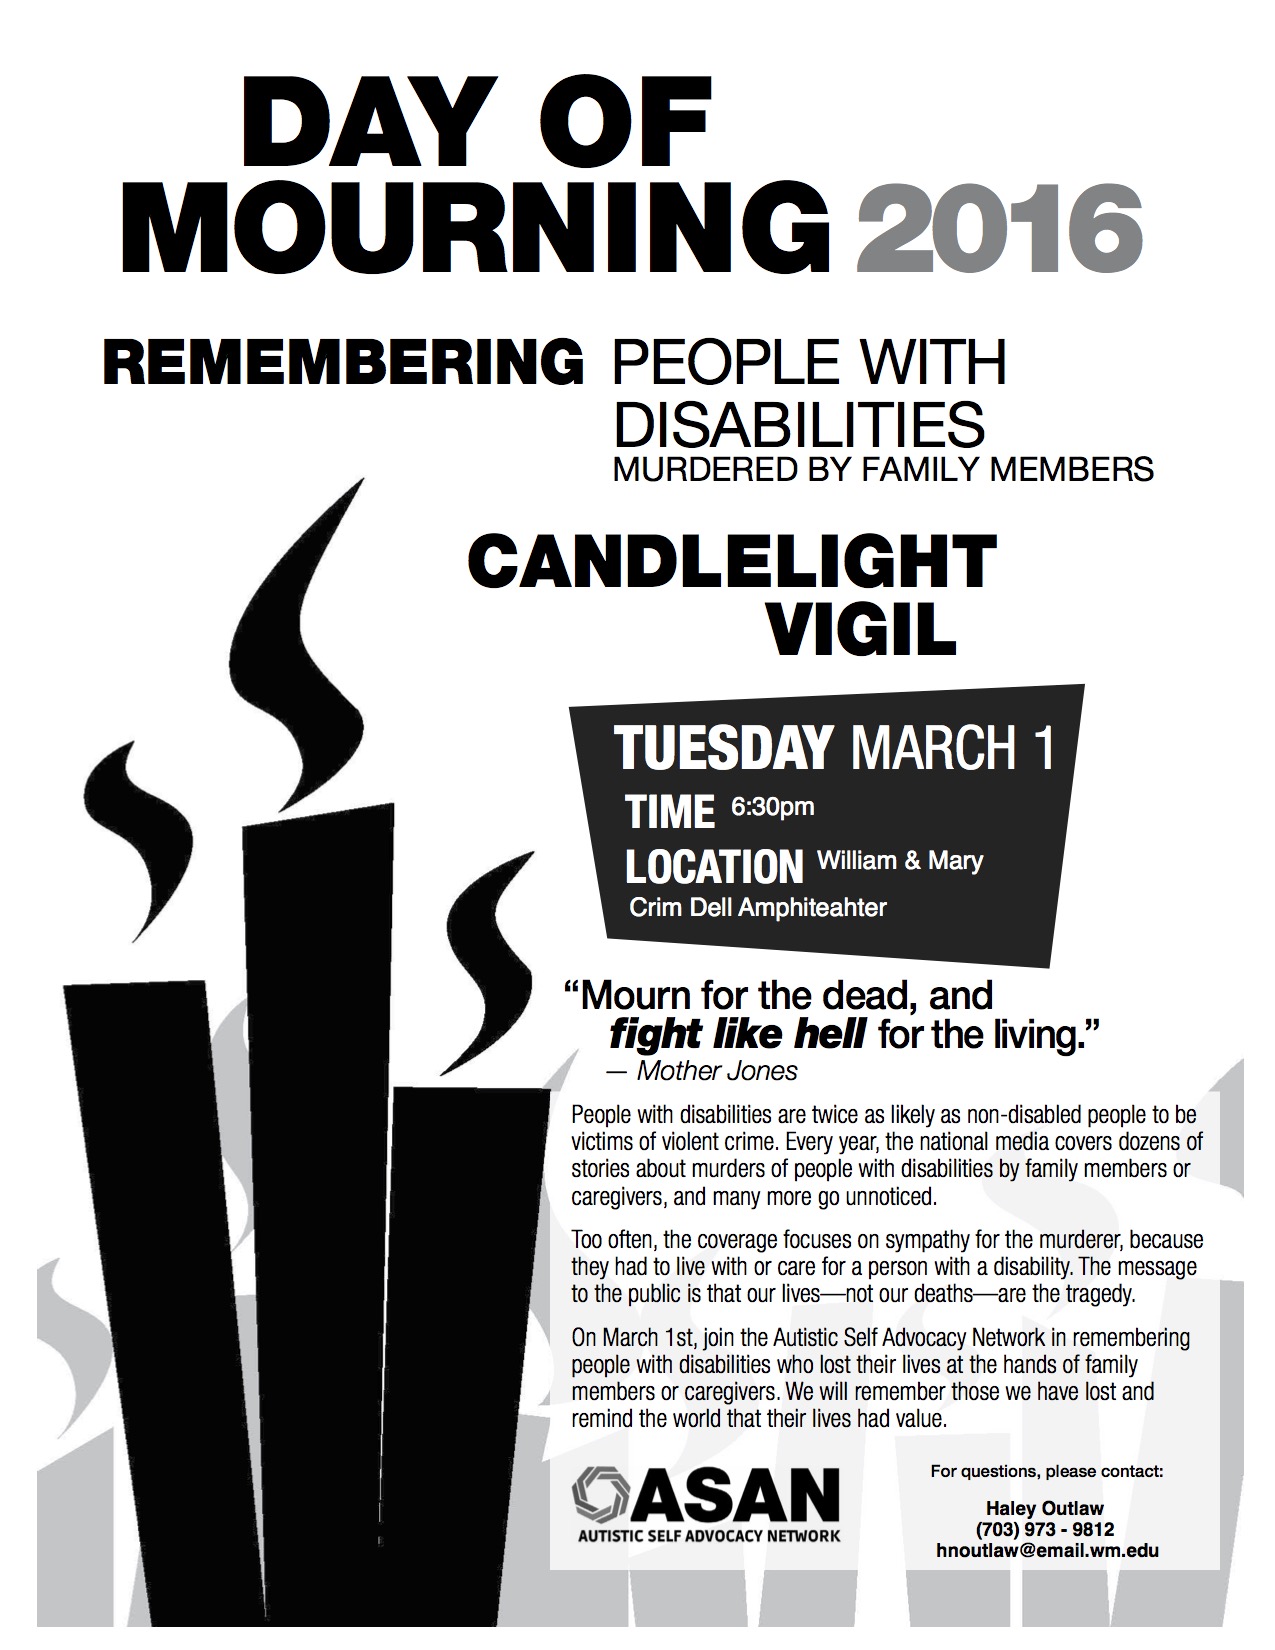 A flyer for the vigil with the time and date, as well as some relevant information, with candle graphics